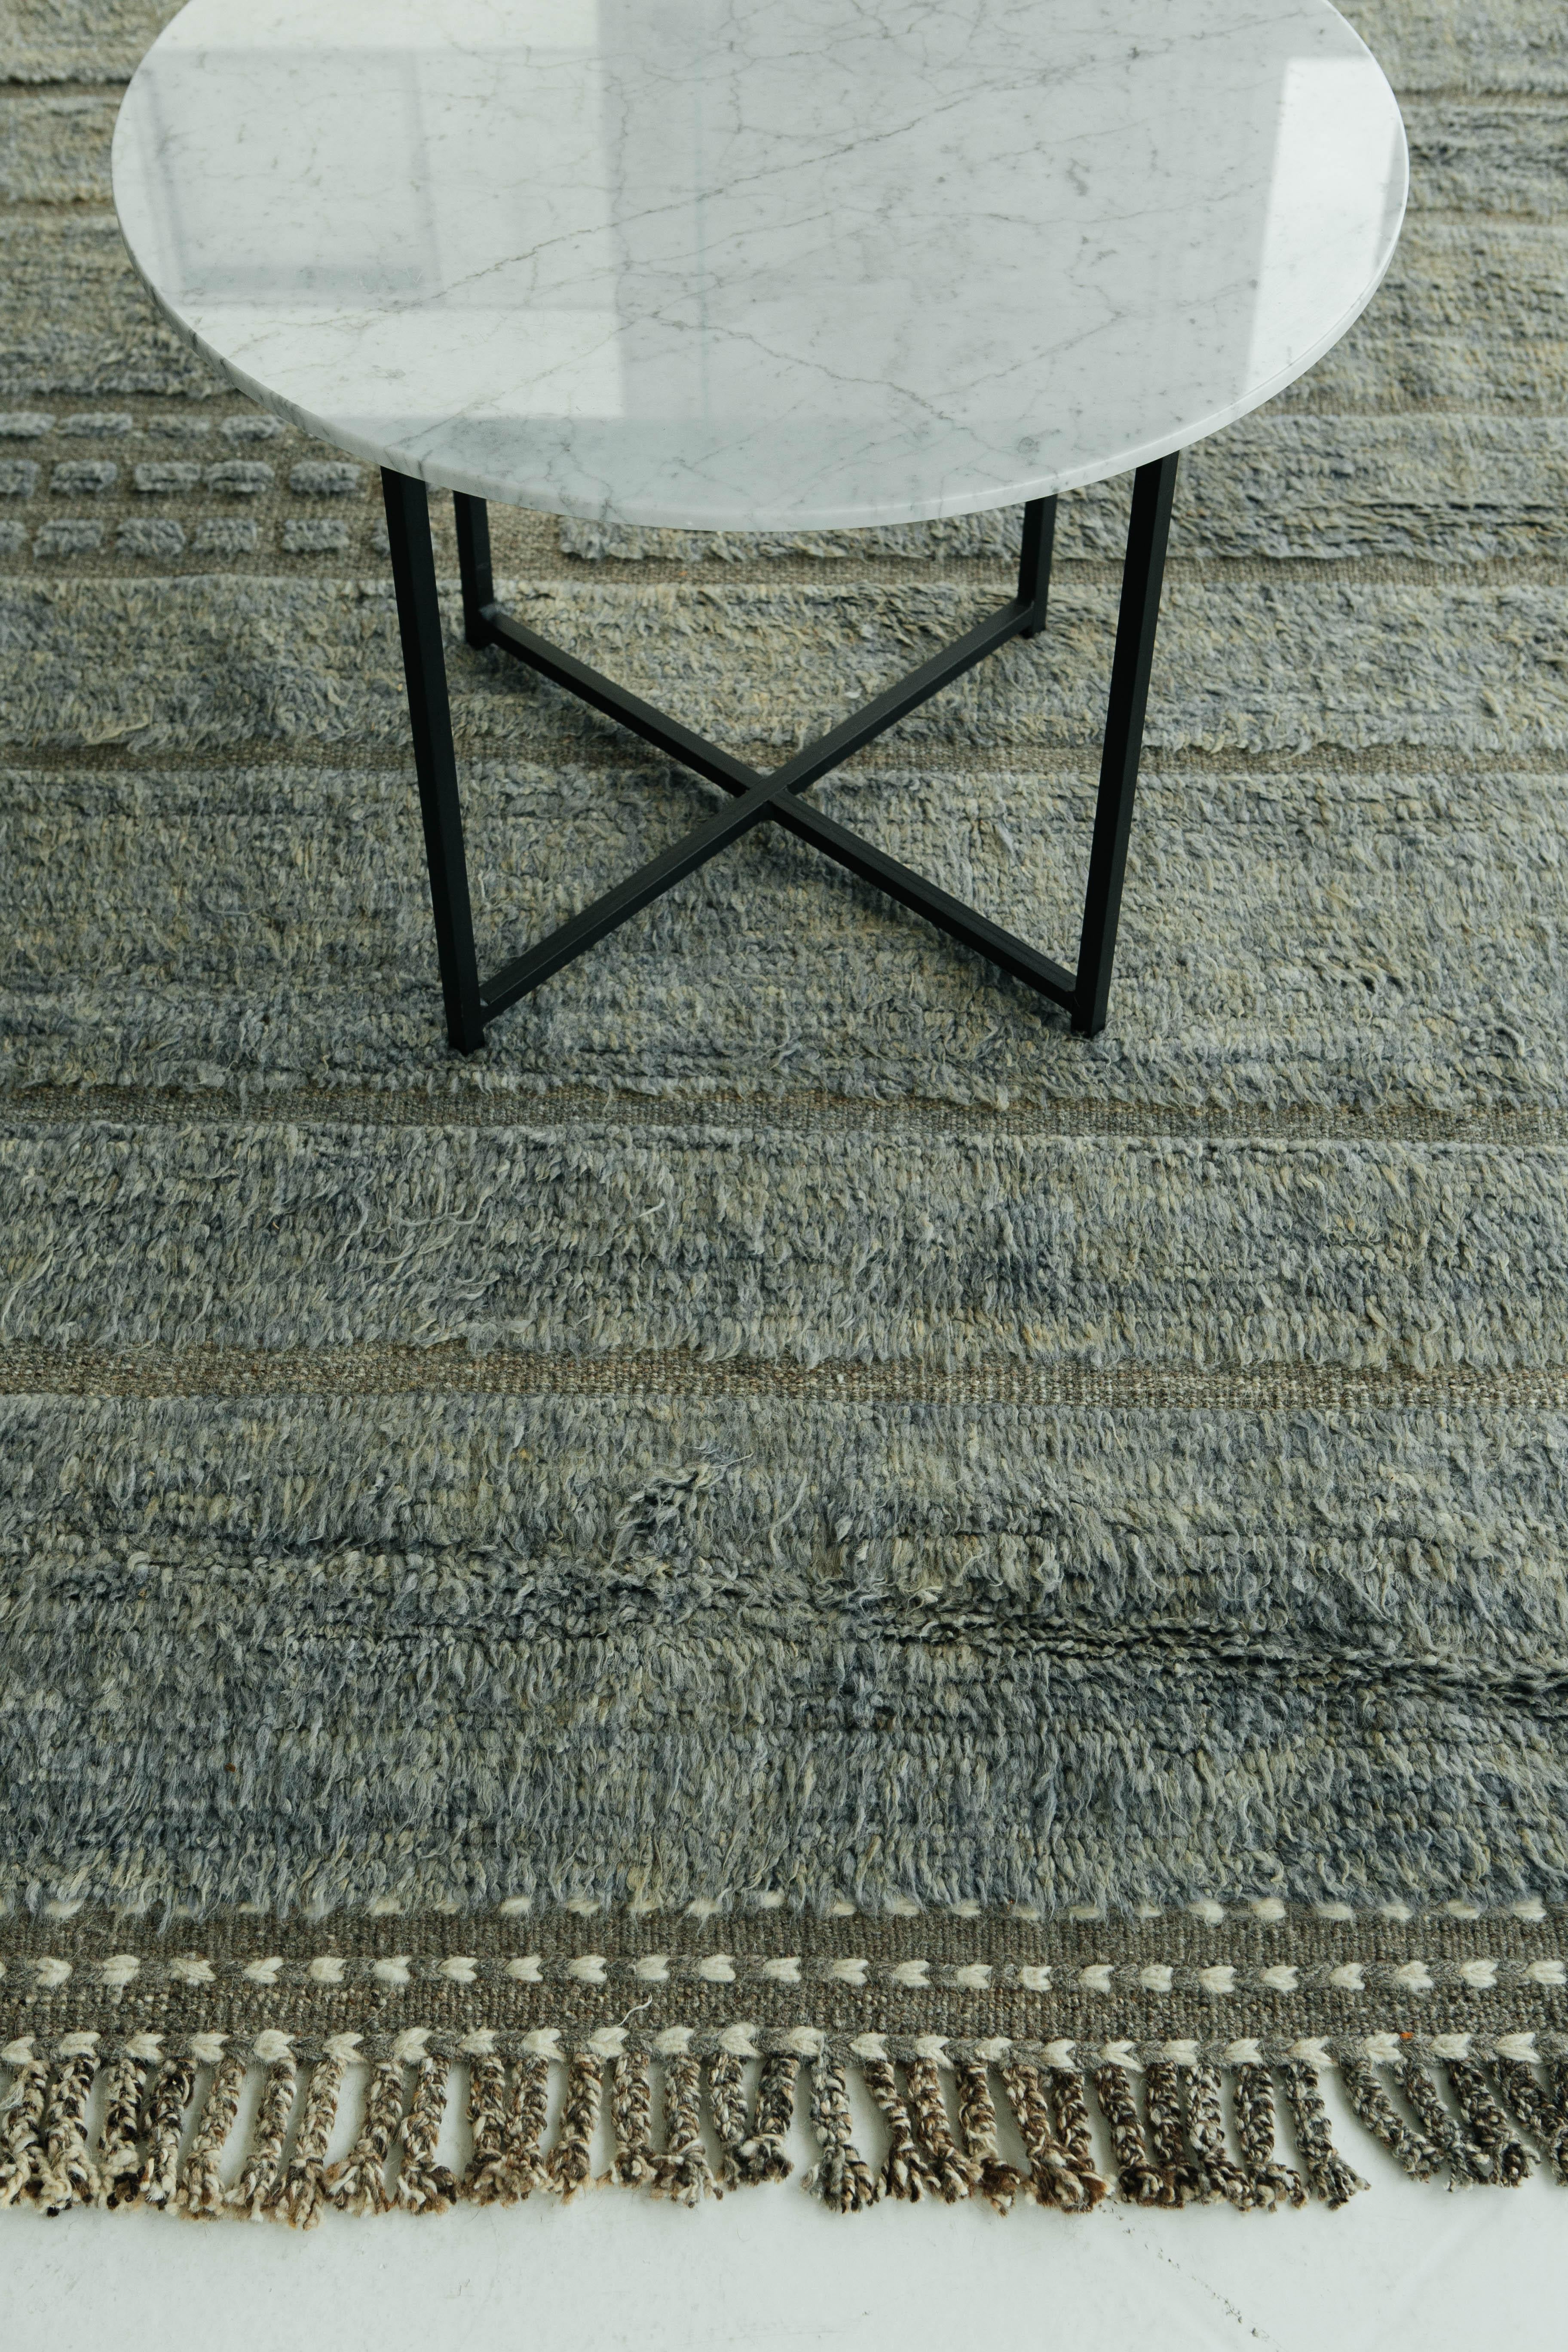 Katabatic is handwoven of a blended blue and green shag on a natural olive green flat-weave with embossed detailing. Designed in Los Angeles with immense detail, Katabatic is meant to be lived on and can withstand high amounts of foot